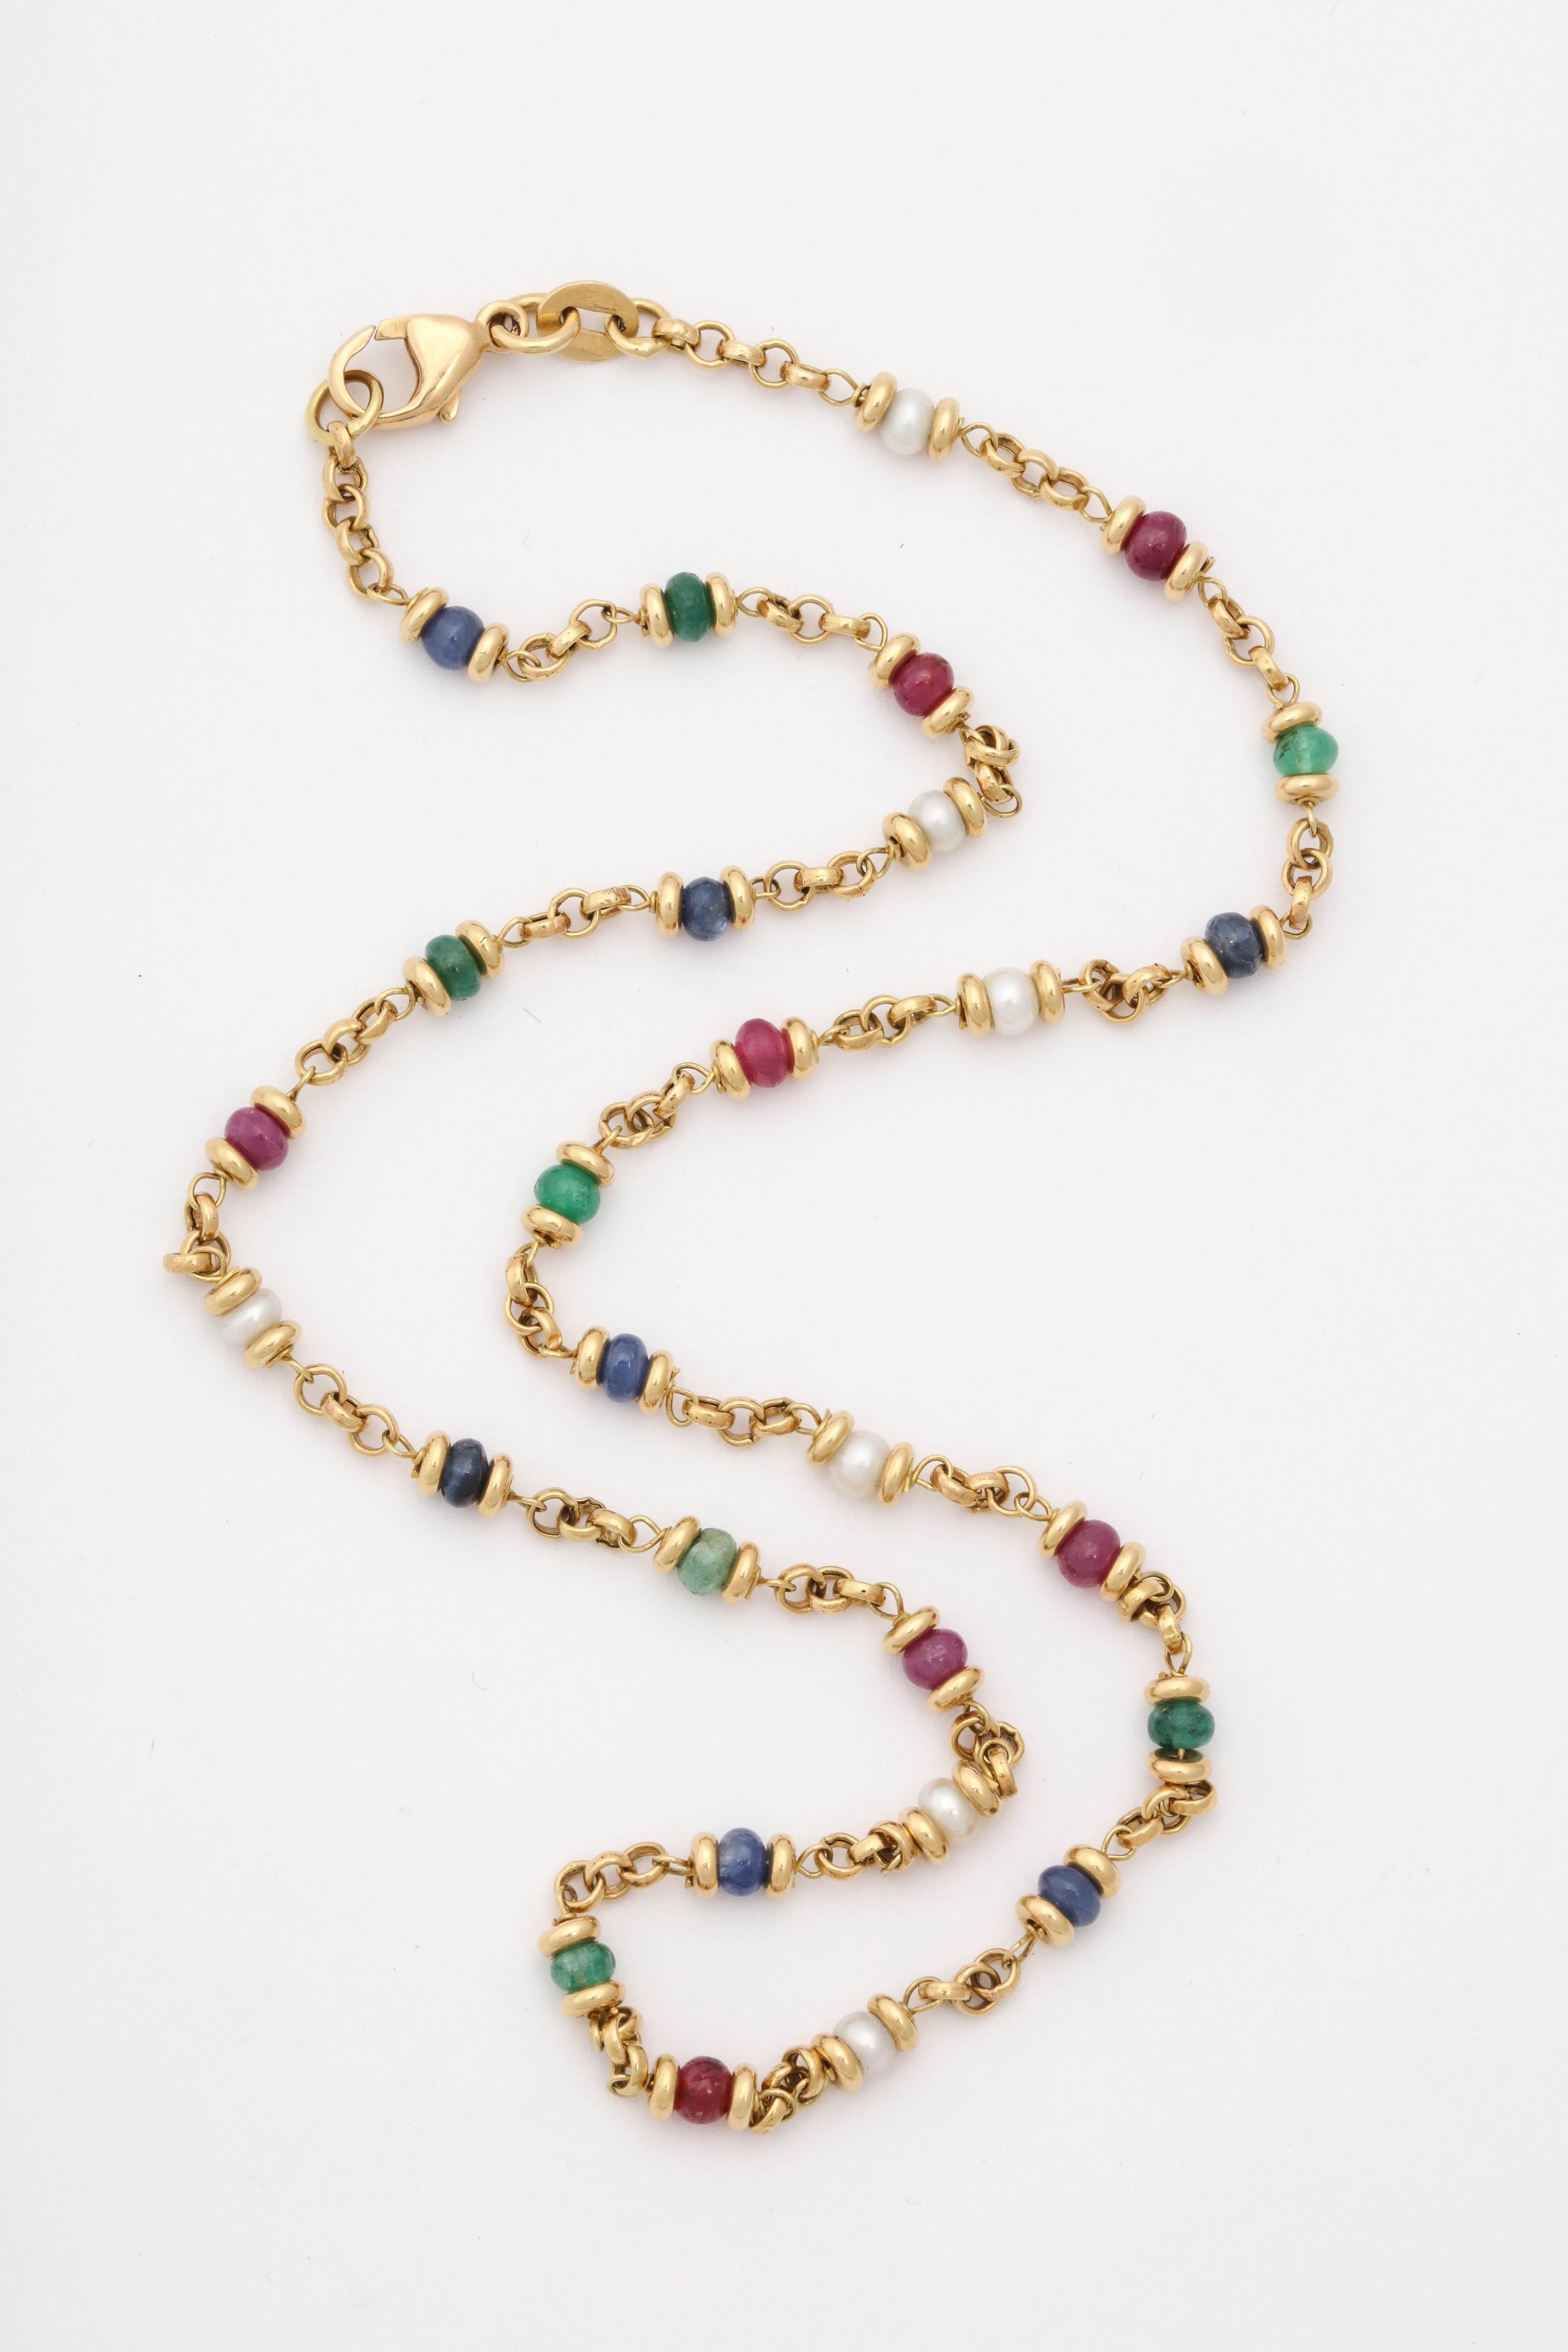 One 18kt Yellow Gold Open Link Chain Necklace Designed With Alternating Emerald,Ruby,Sapphire And Pearl Beads. Created In Italy In The 1980's With A Beautiful Easy To Use Lobster Clasp.